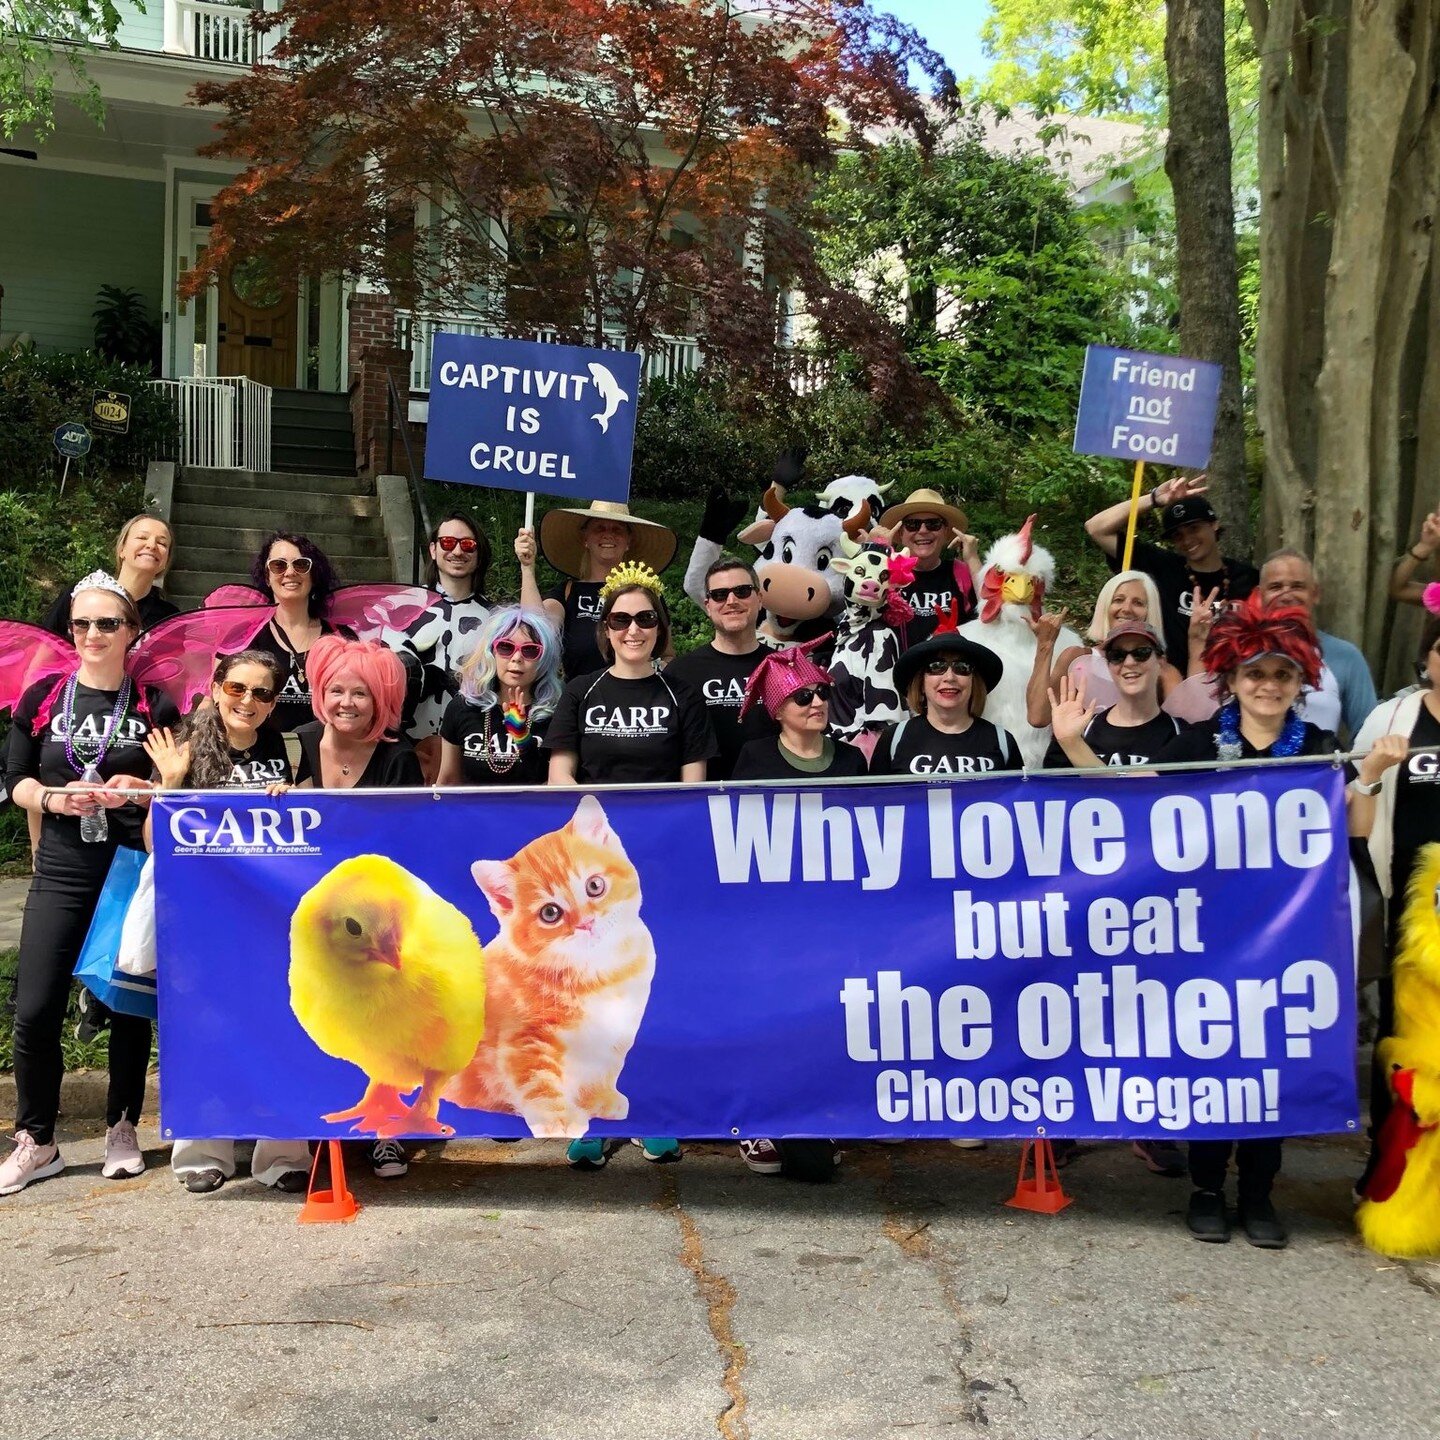 Thank you everyone for joining GARP in the Inman Park Parade, doing incredible vegan outreach and having a super fun day as well. Volunteers handed out nearly 800 vegan started kits. Thank you for your amazing energy and creativity!